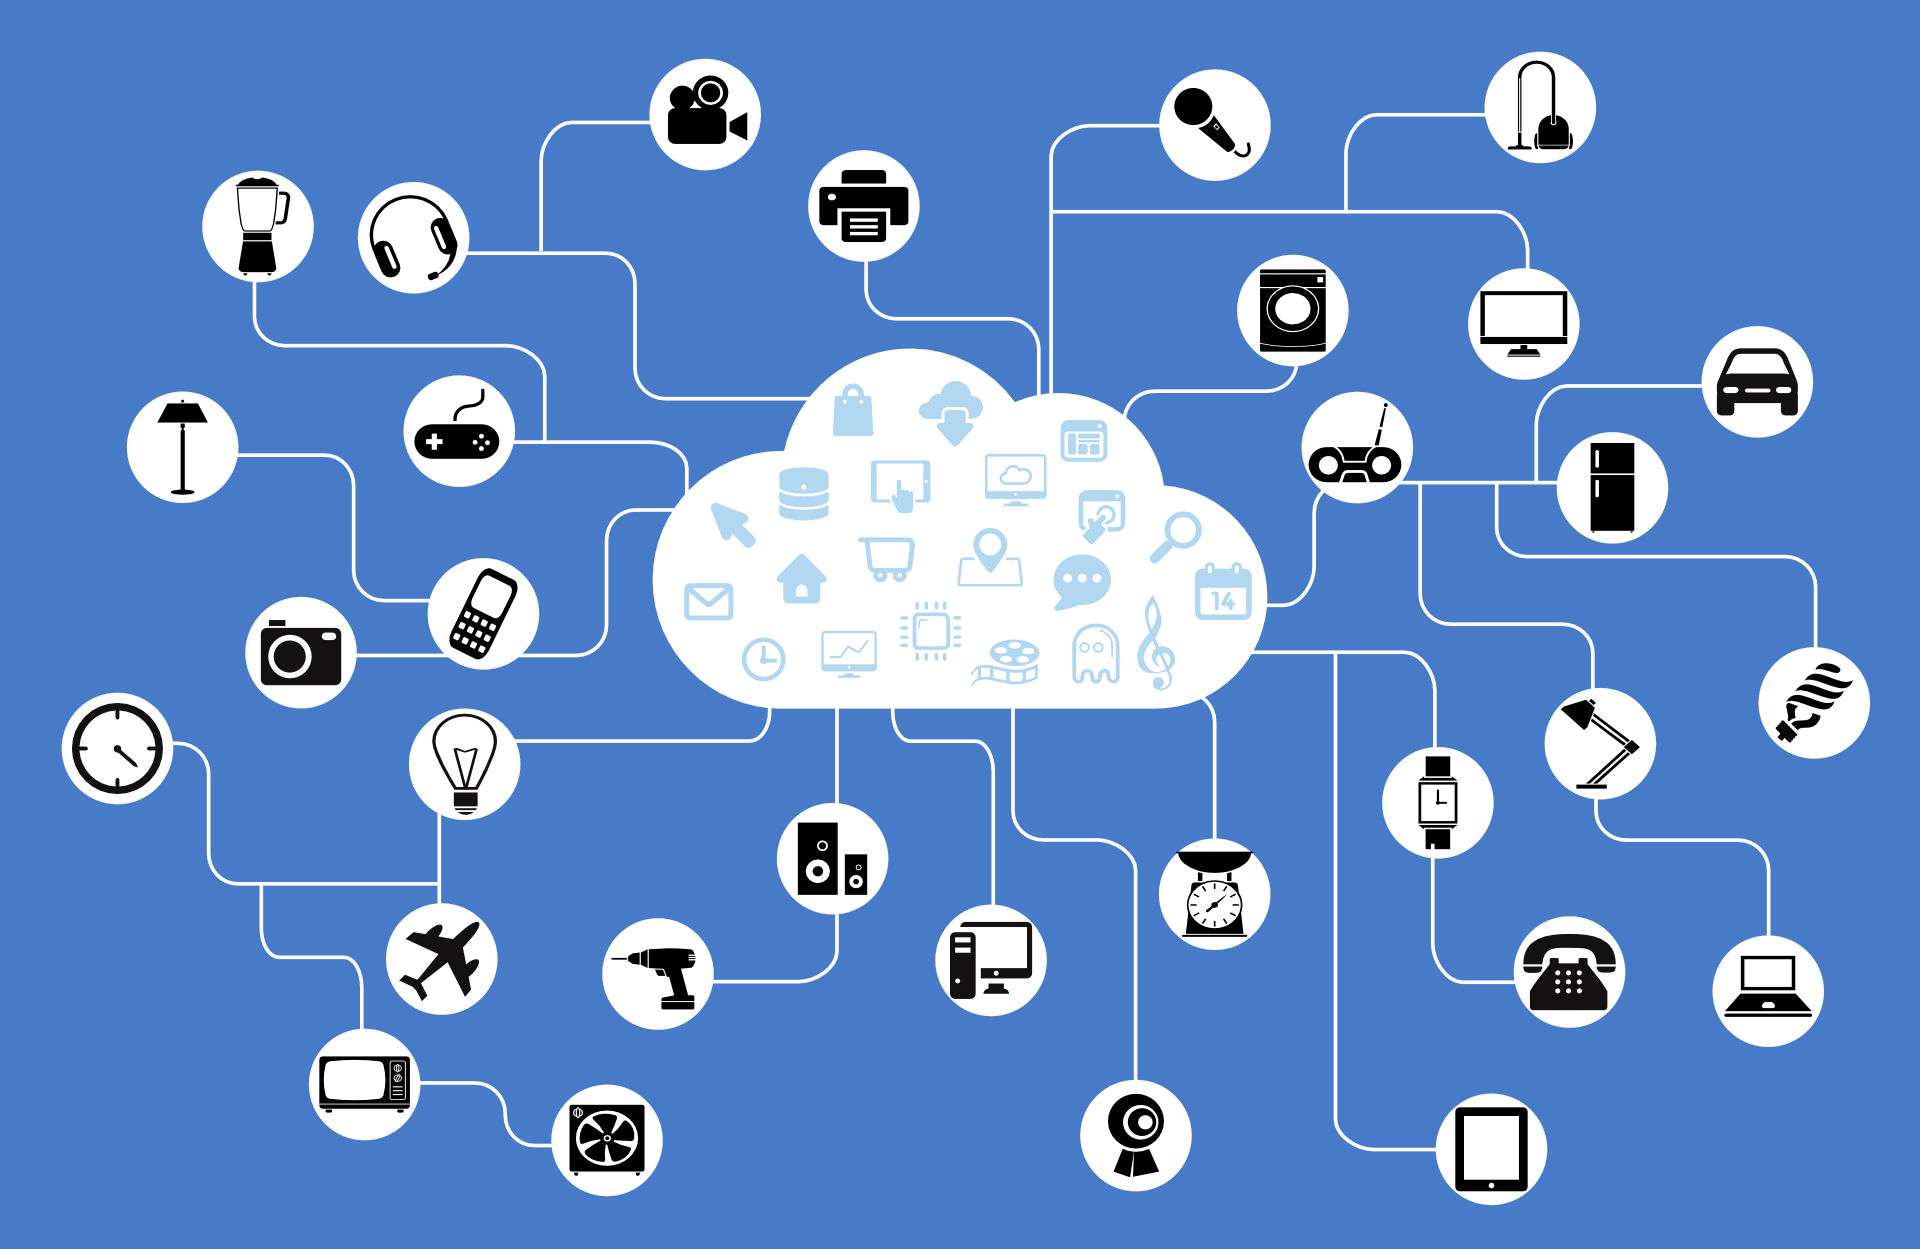 The Internet of Things (IoT): What Does It Mean for Marketers?